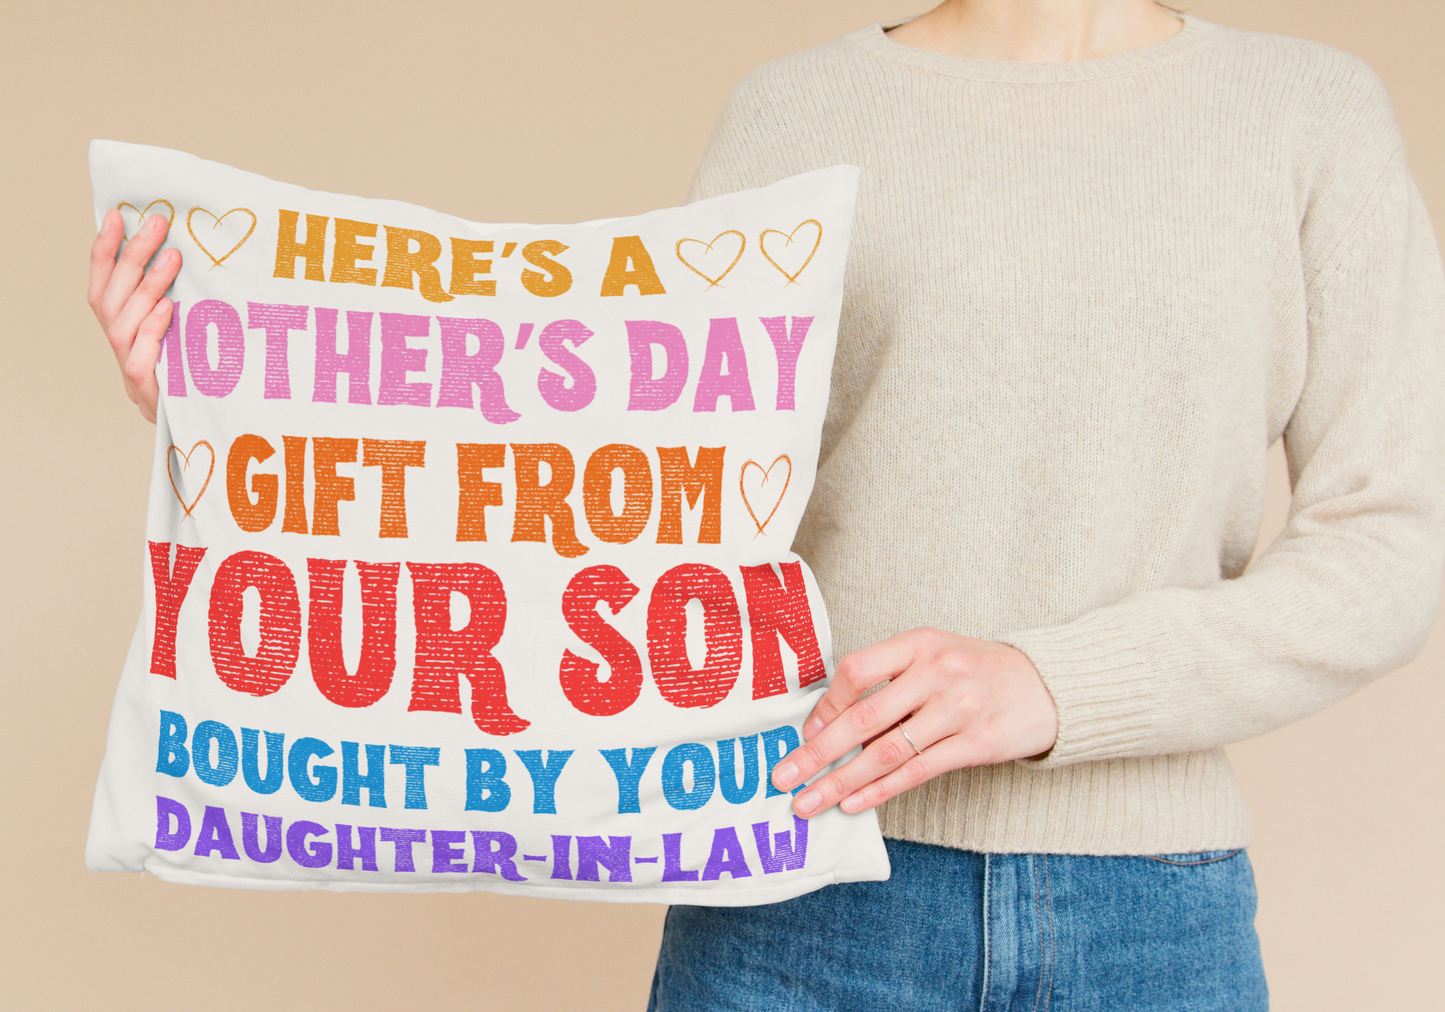 Mother-In-Law Gift From Your Son Pillow